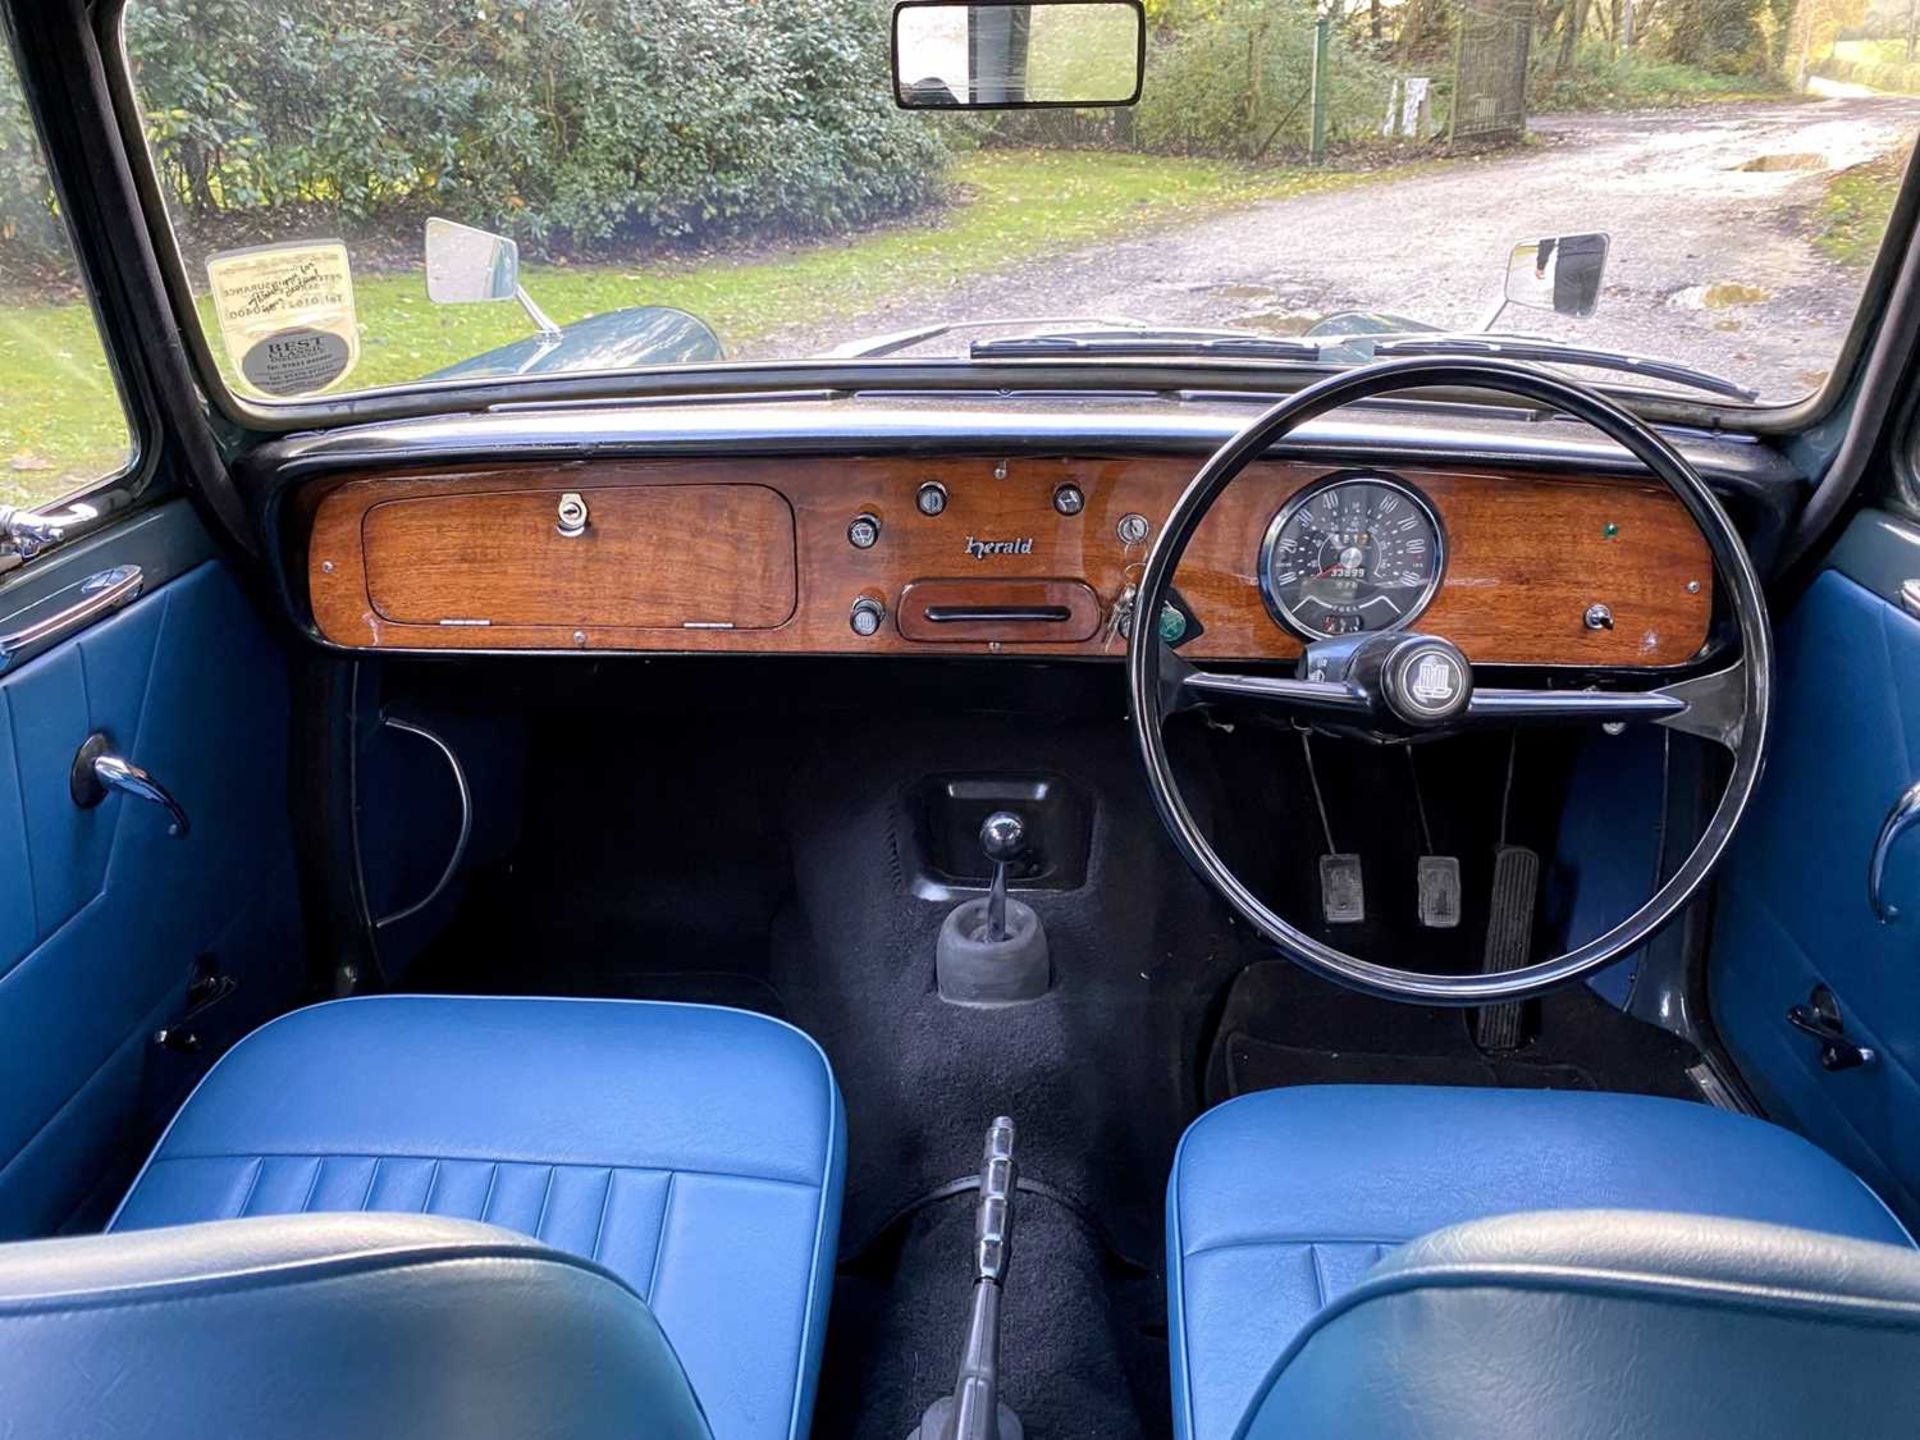 1967 Triumph Herald 12/50 *** NO RESERVE *** Subject to an extensive restoration - Image 35 of 97